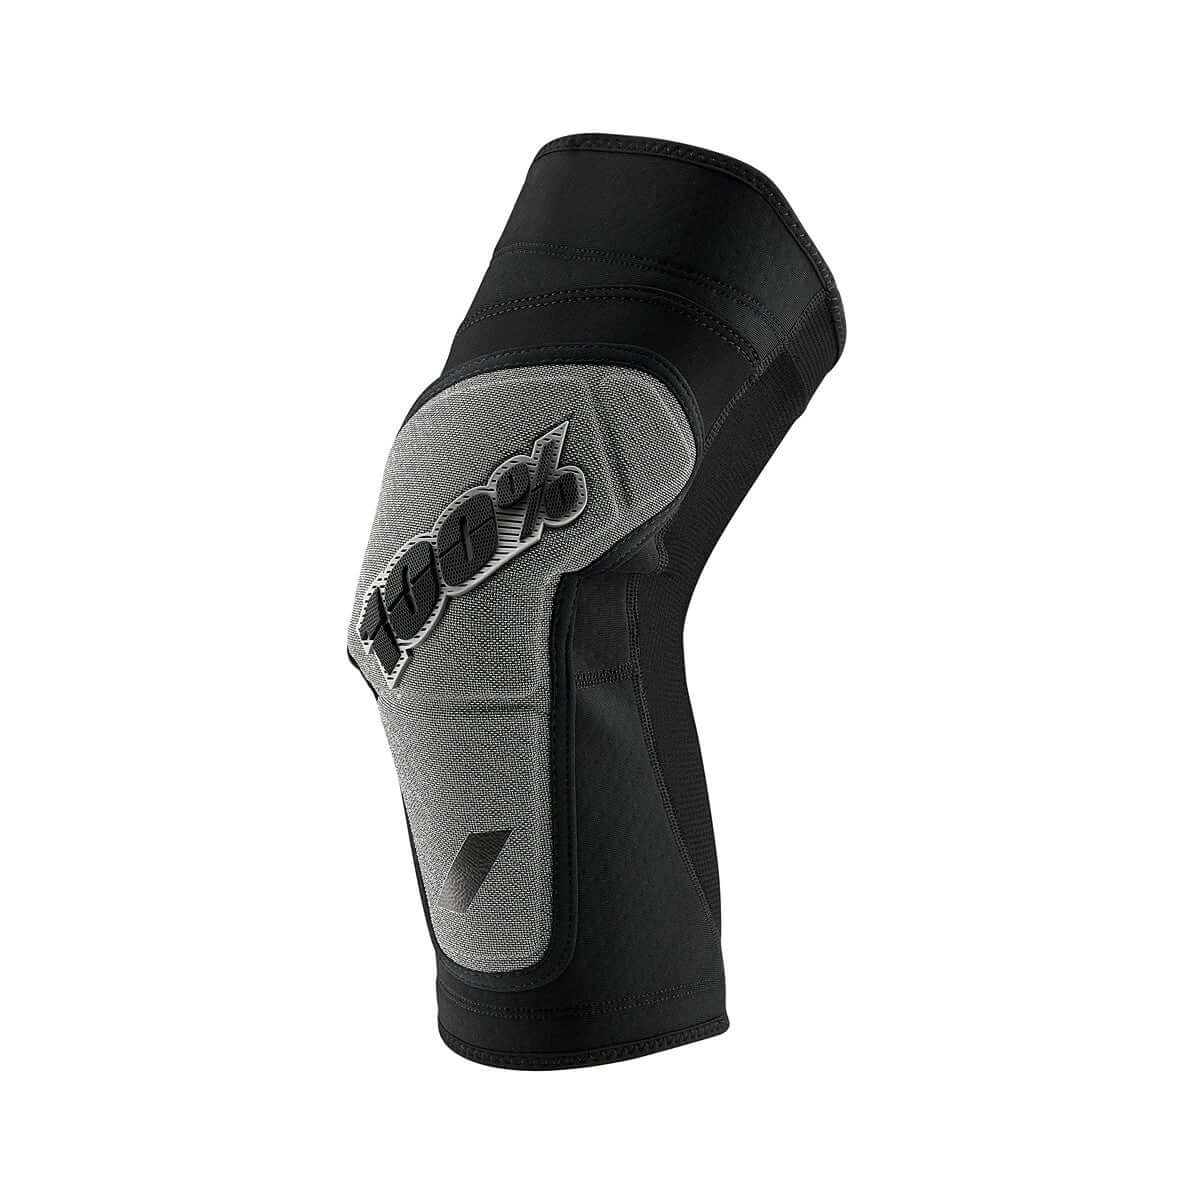 100% Ridecamp Knee Guards Black/Grey Protective Gear